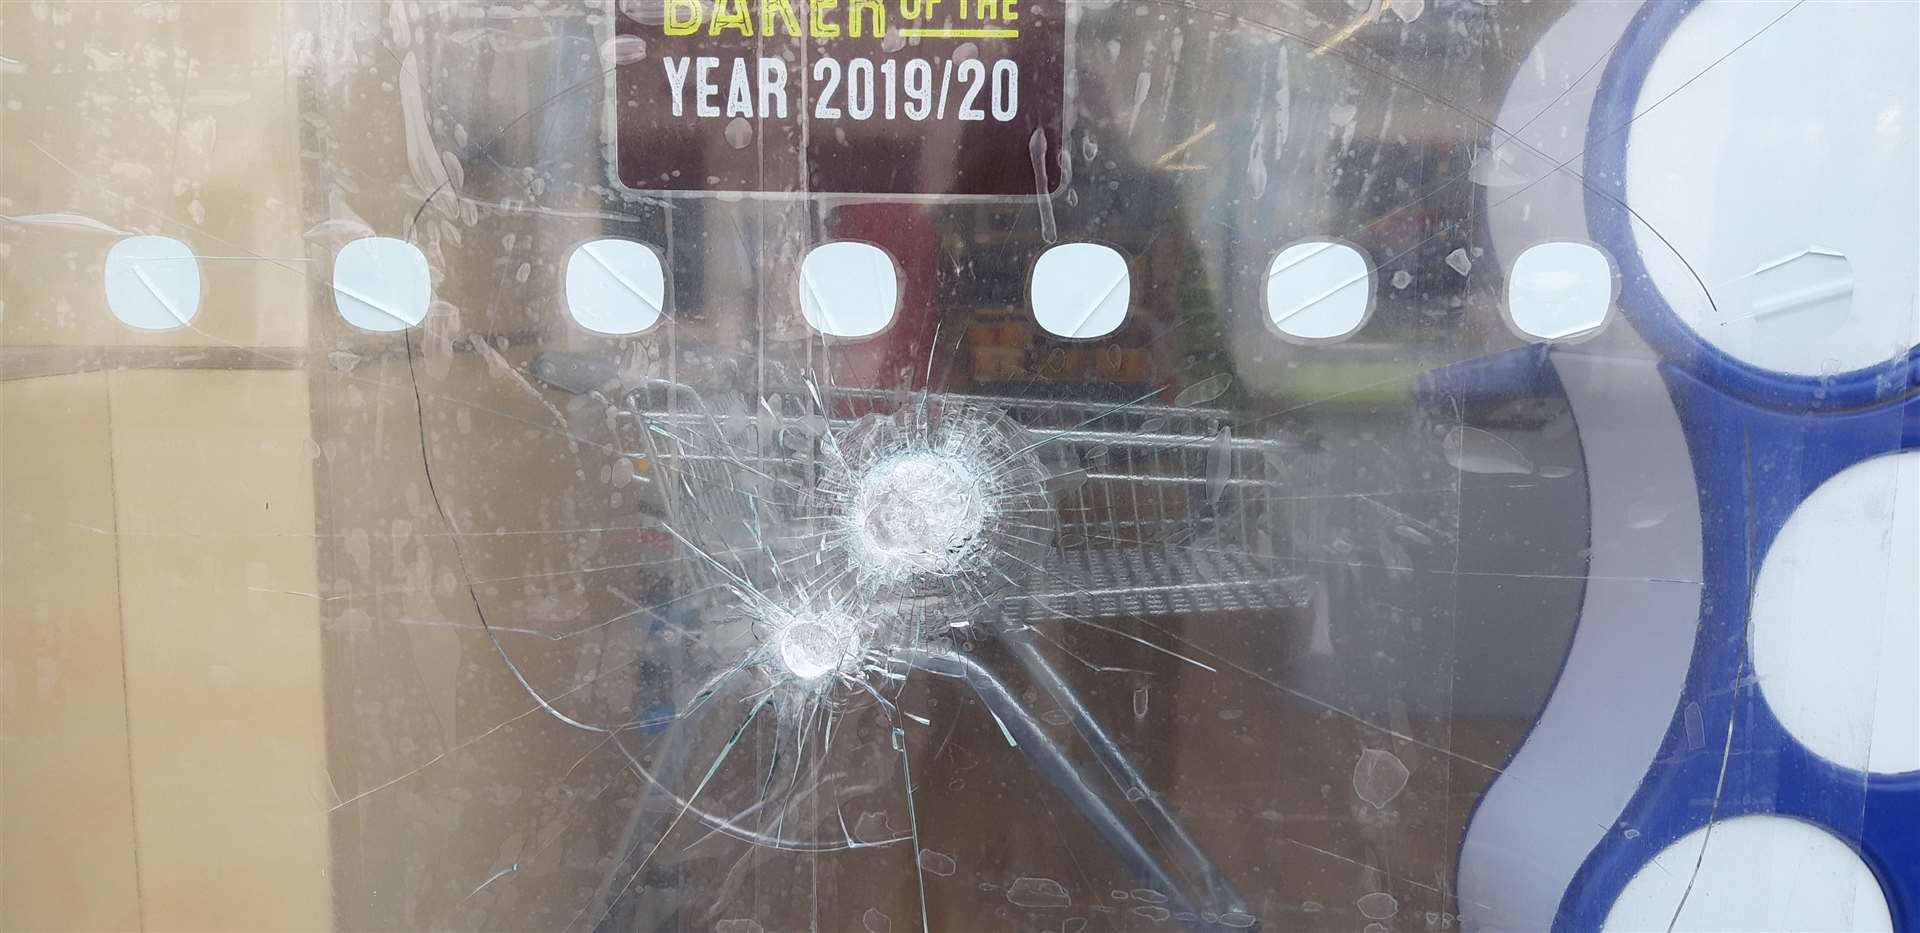 A hammer was used to damage the windows at Brora Co-op.